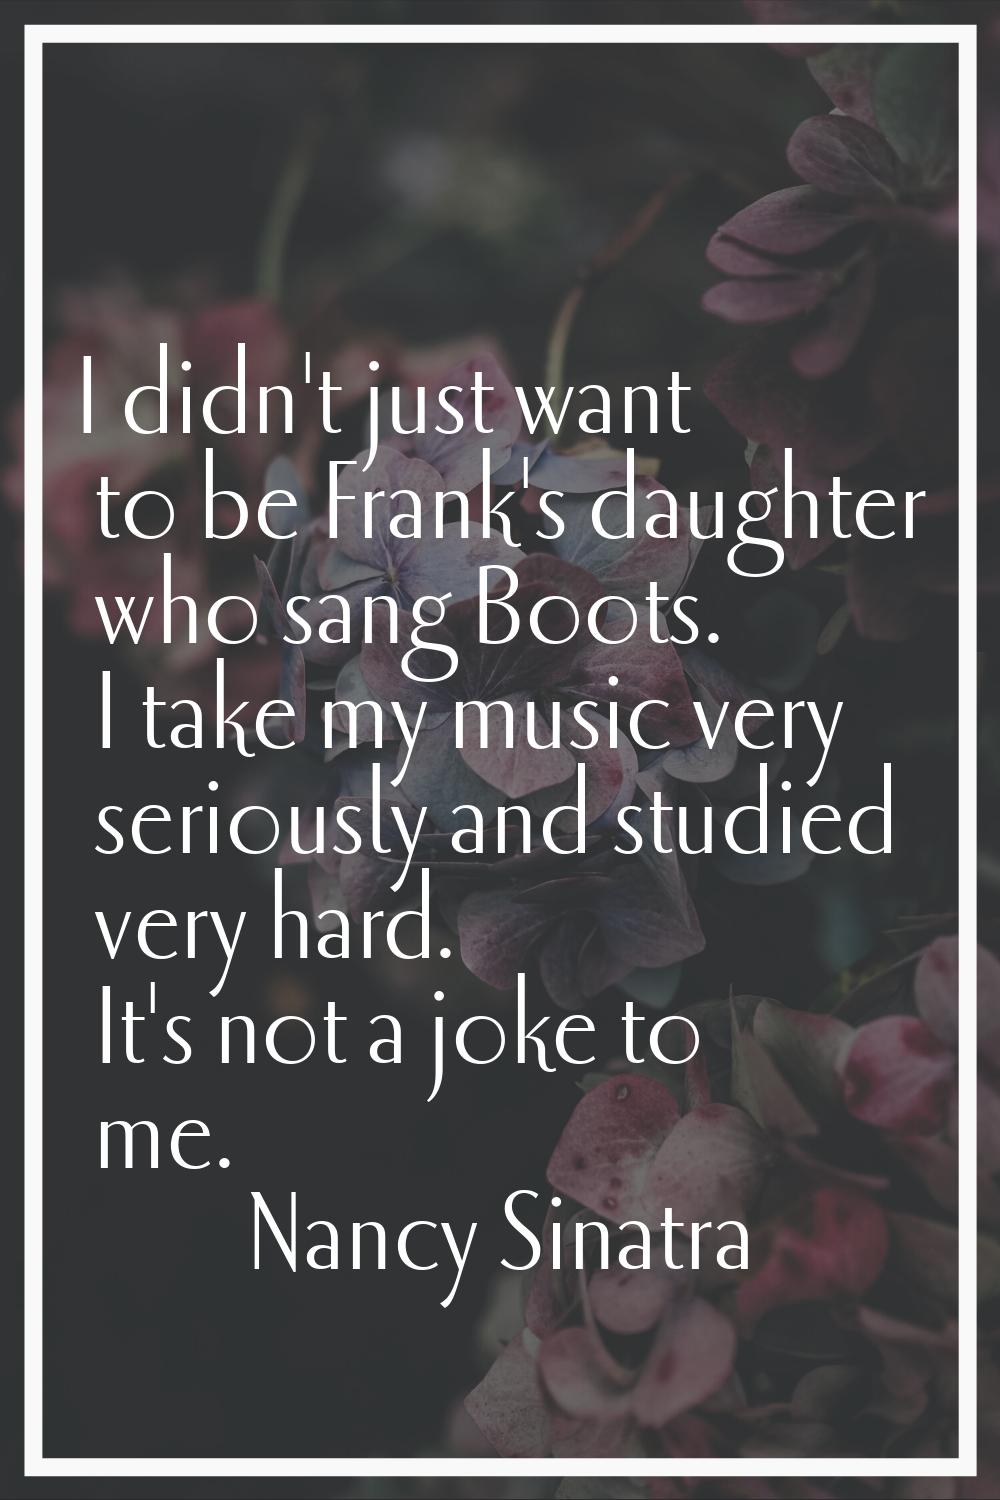 I didn't just want to be Frank's daughter who sang Boots. I take my music very seriously and studie